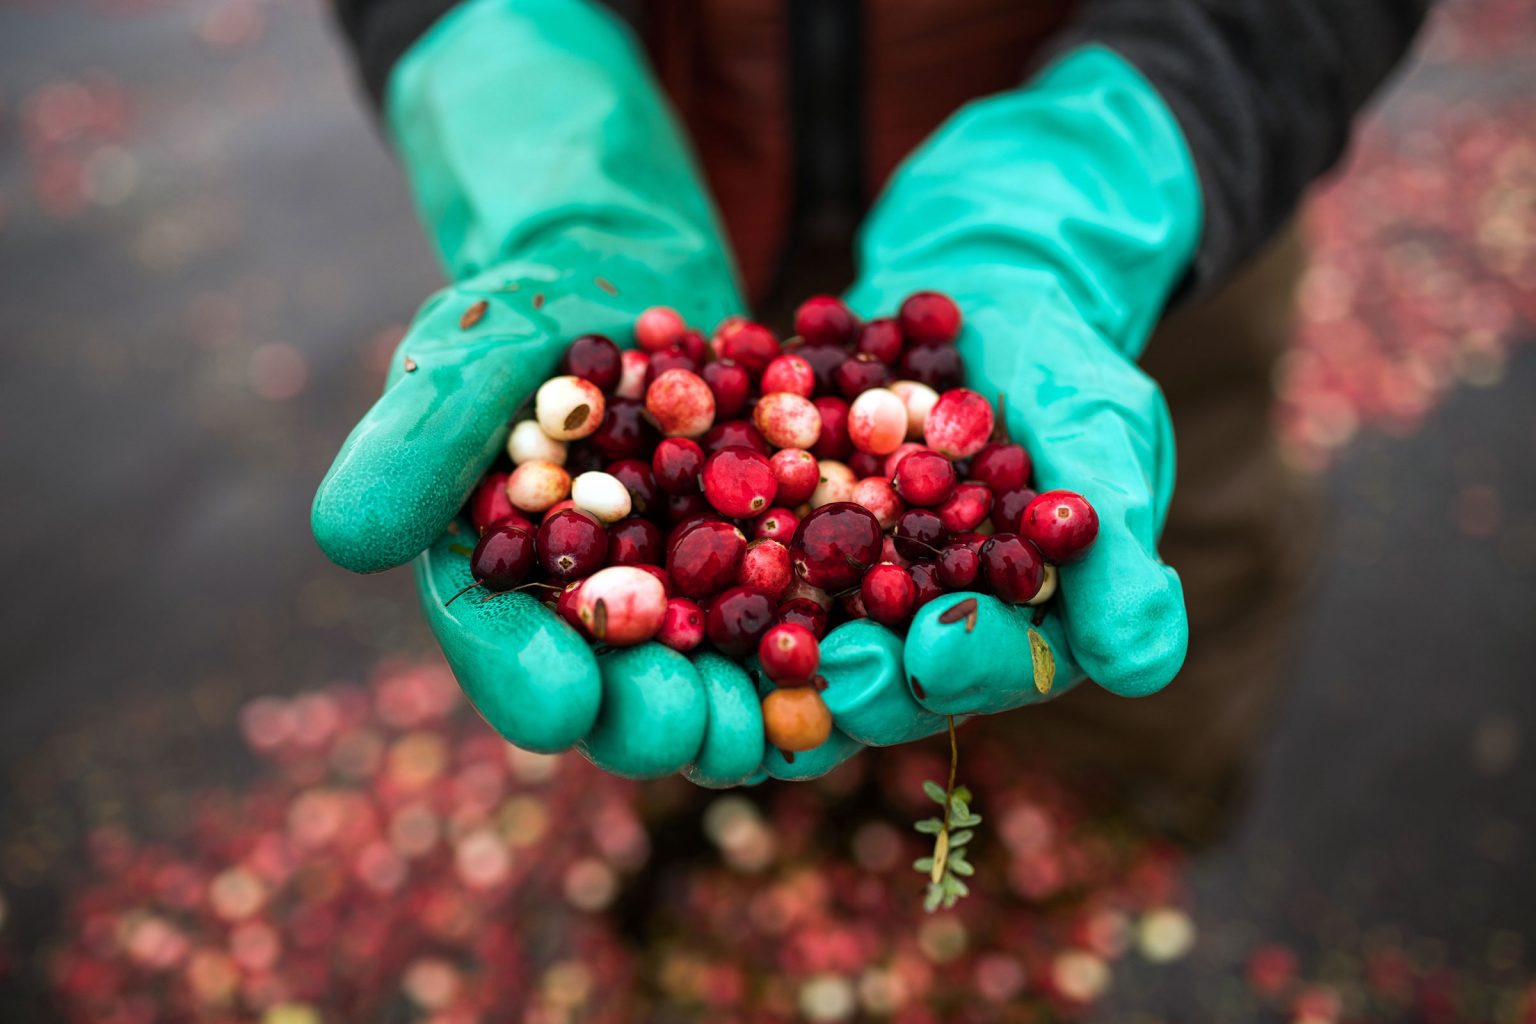 Gloved hands holding a handful of freshly picked cranberries.